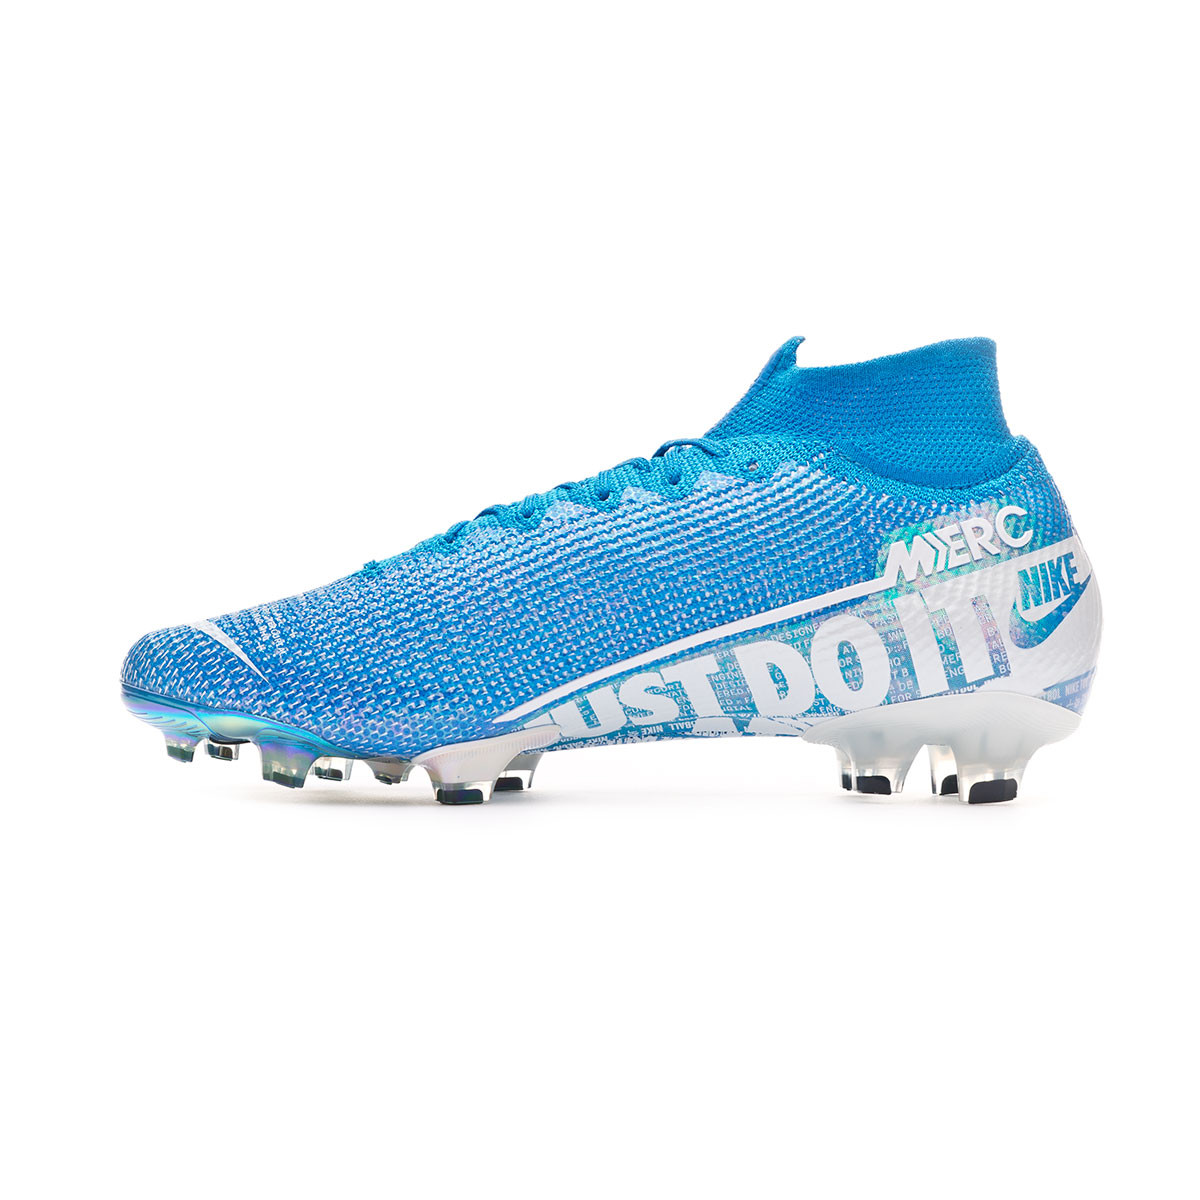 mercurial superfly 7 blue